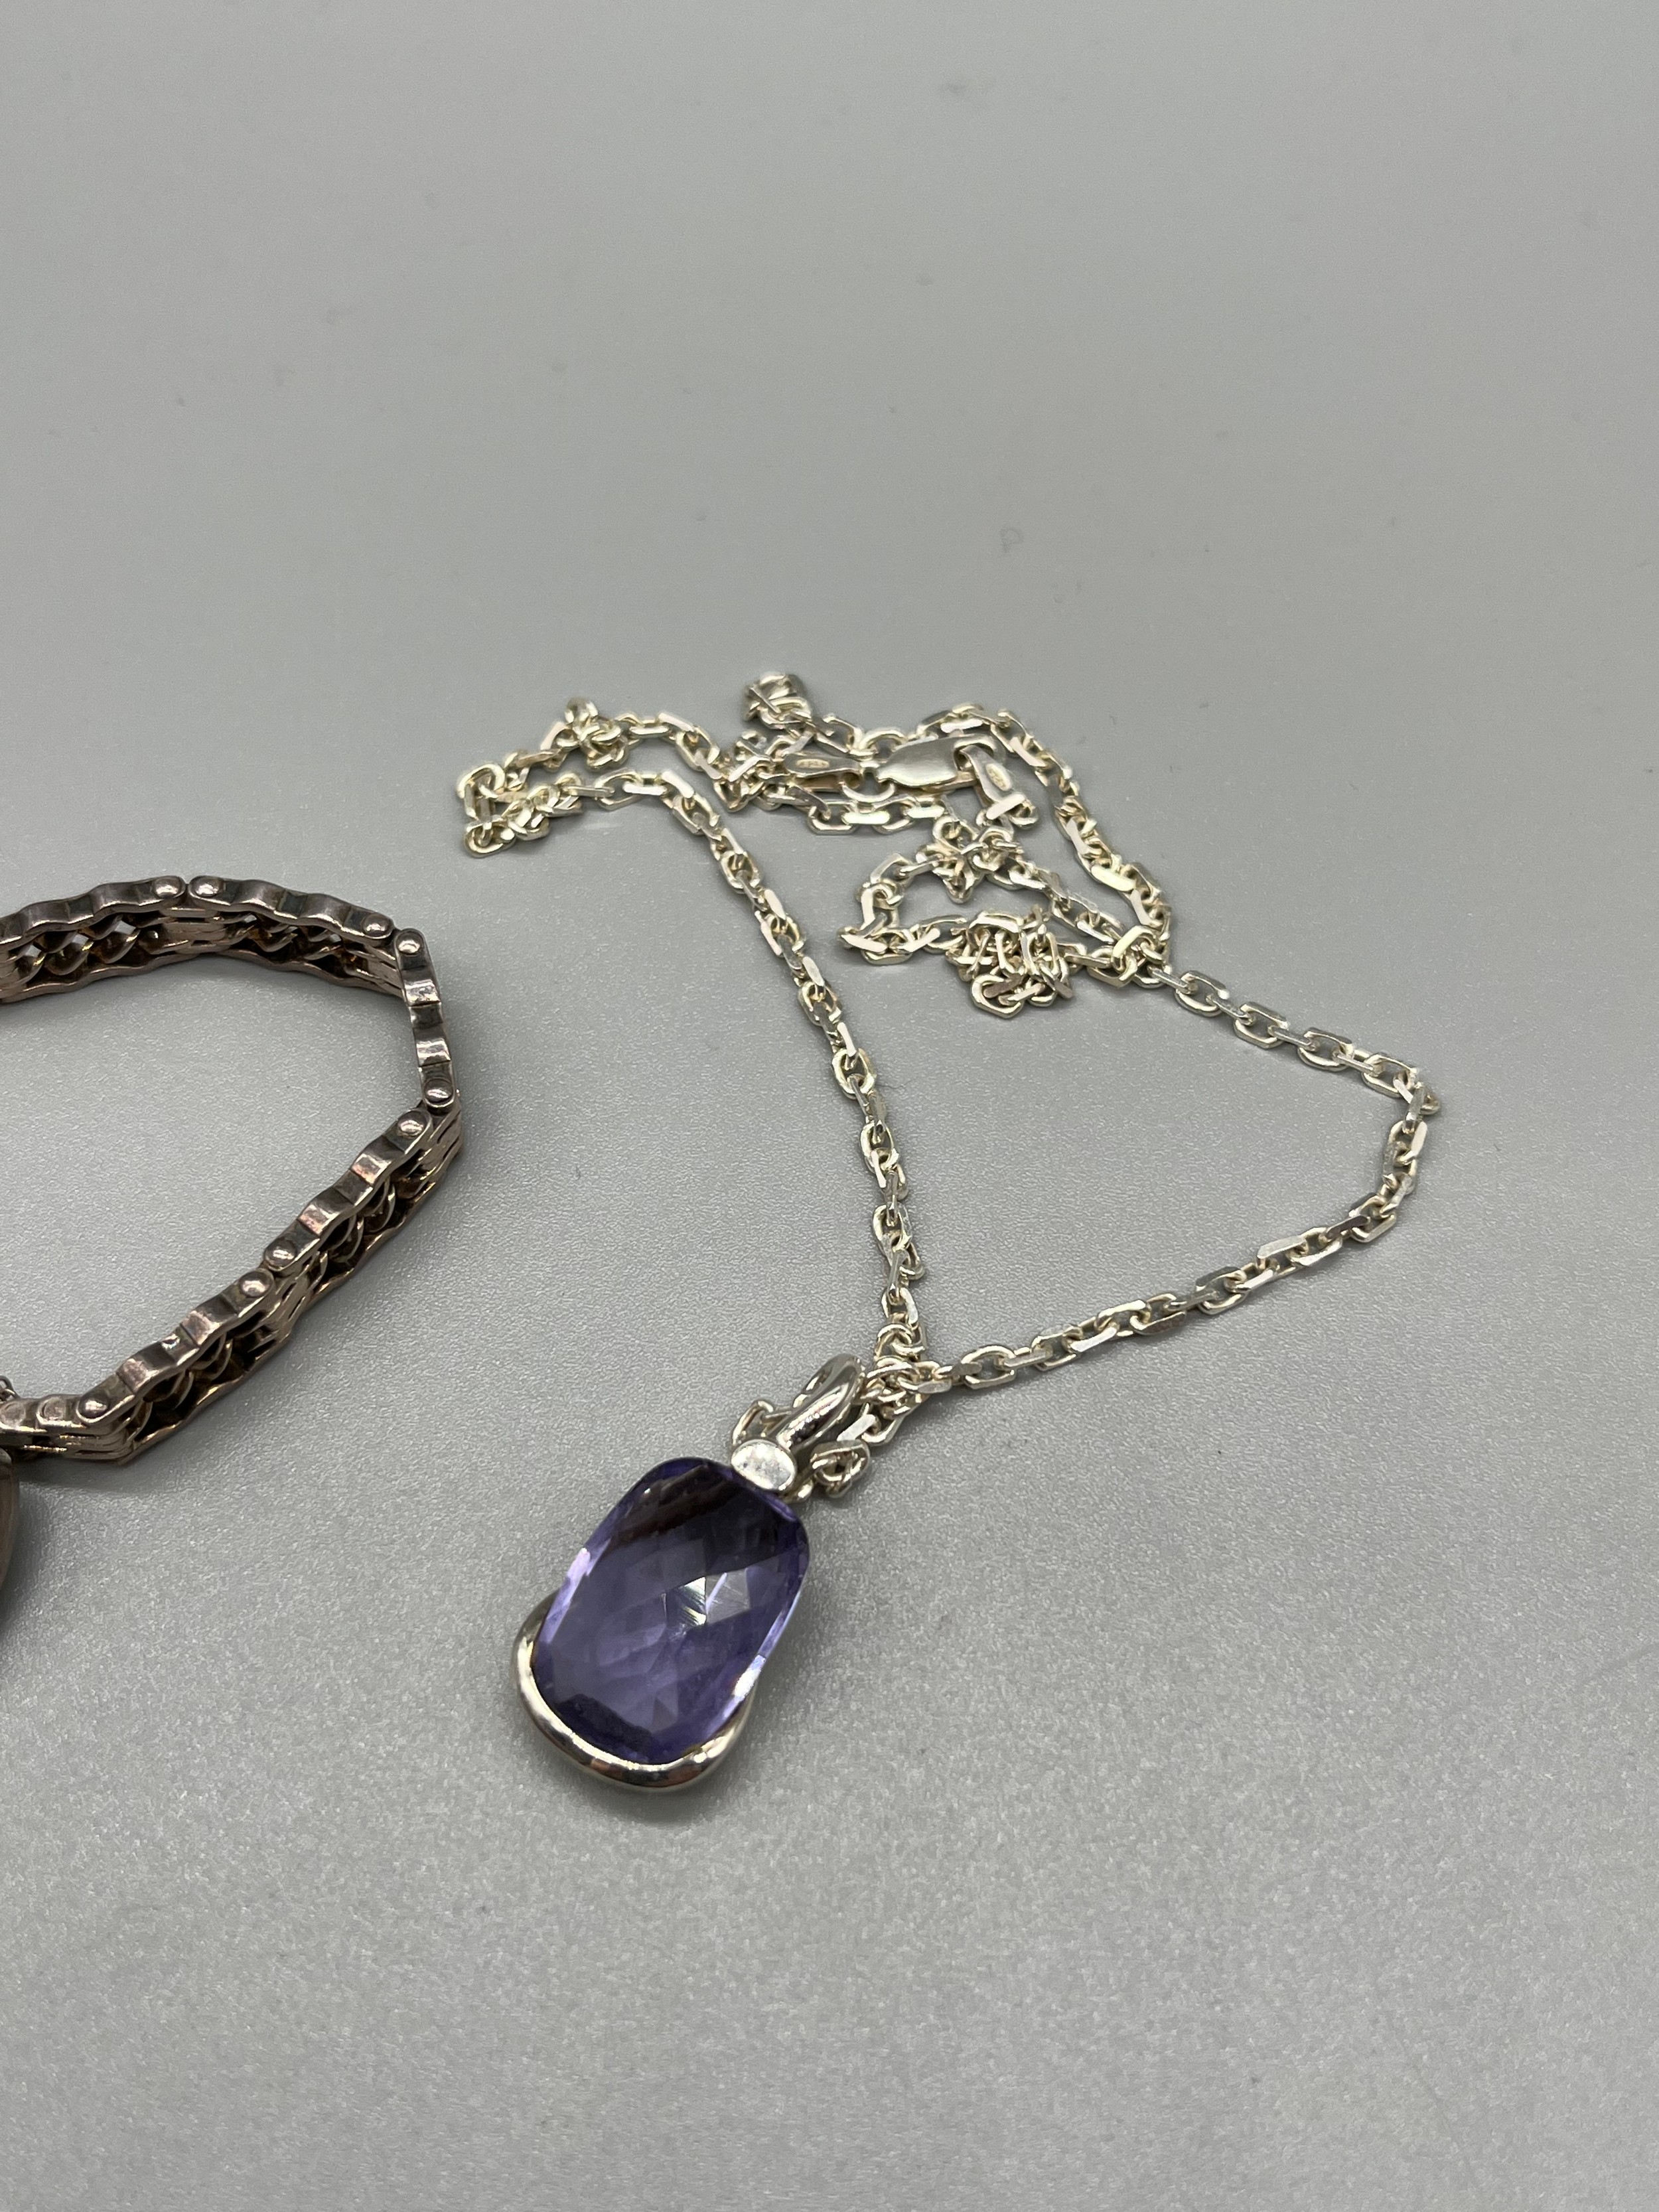 A Silver bracelet with heart lock attached, together with a silver and purple stone pendant with - Image 3 of 3